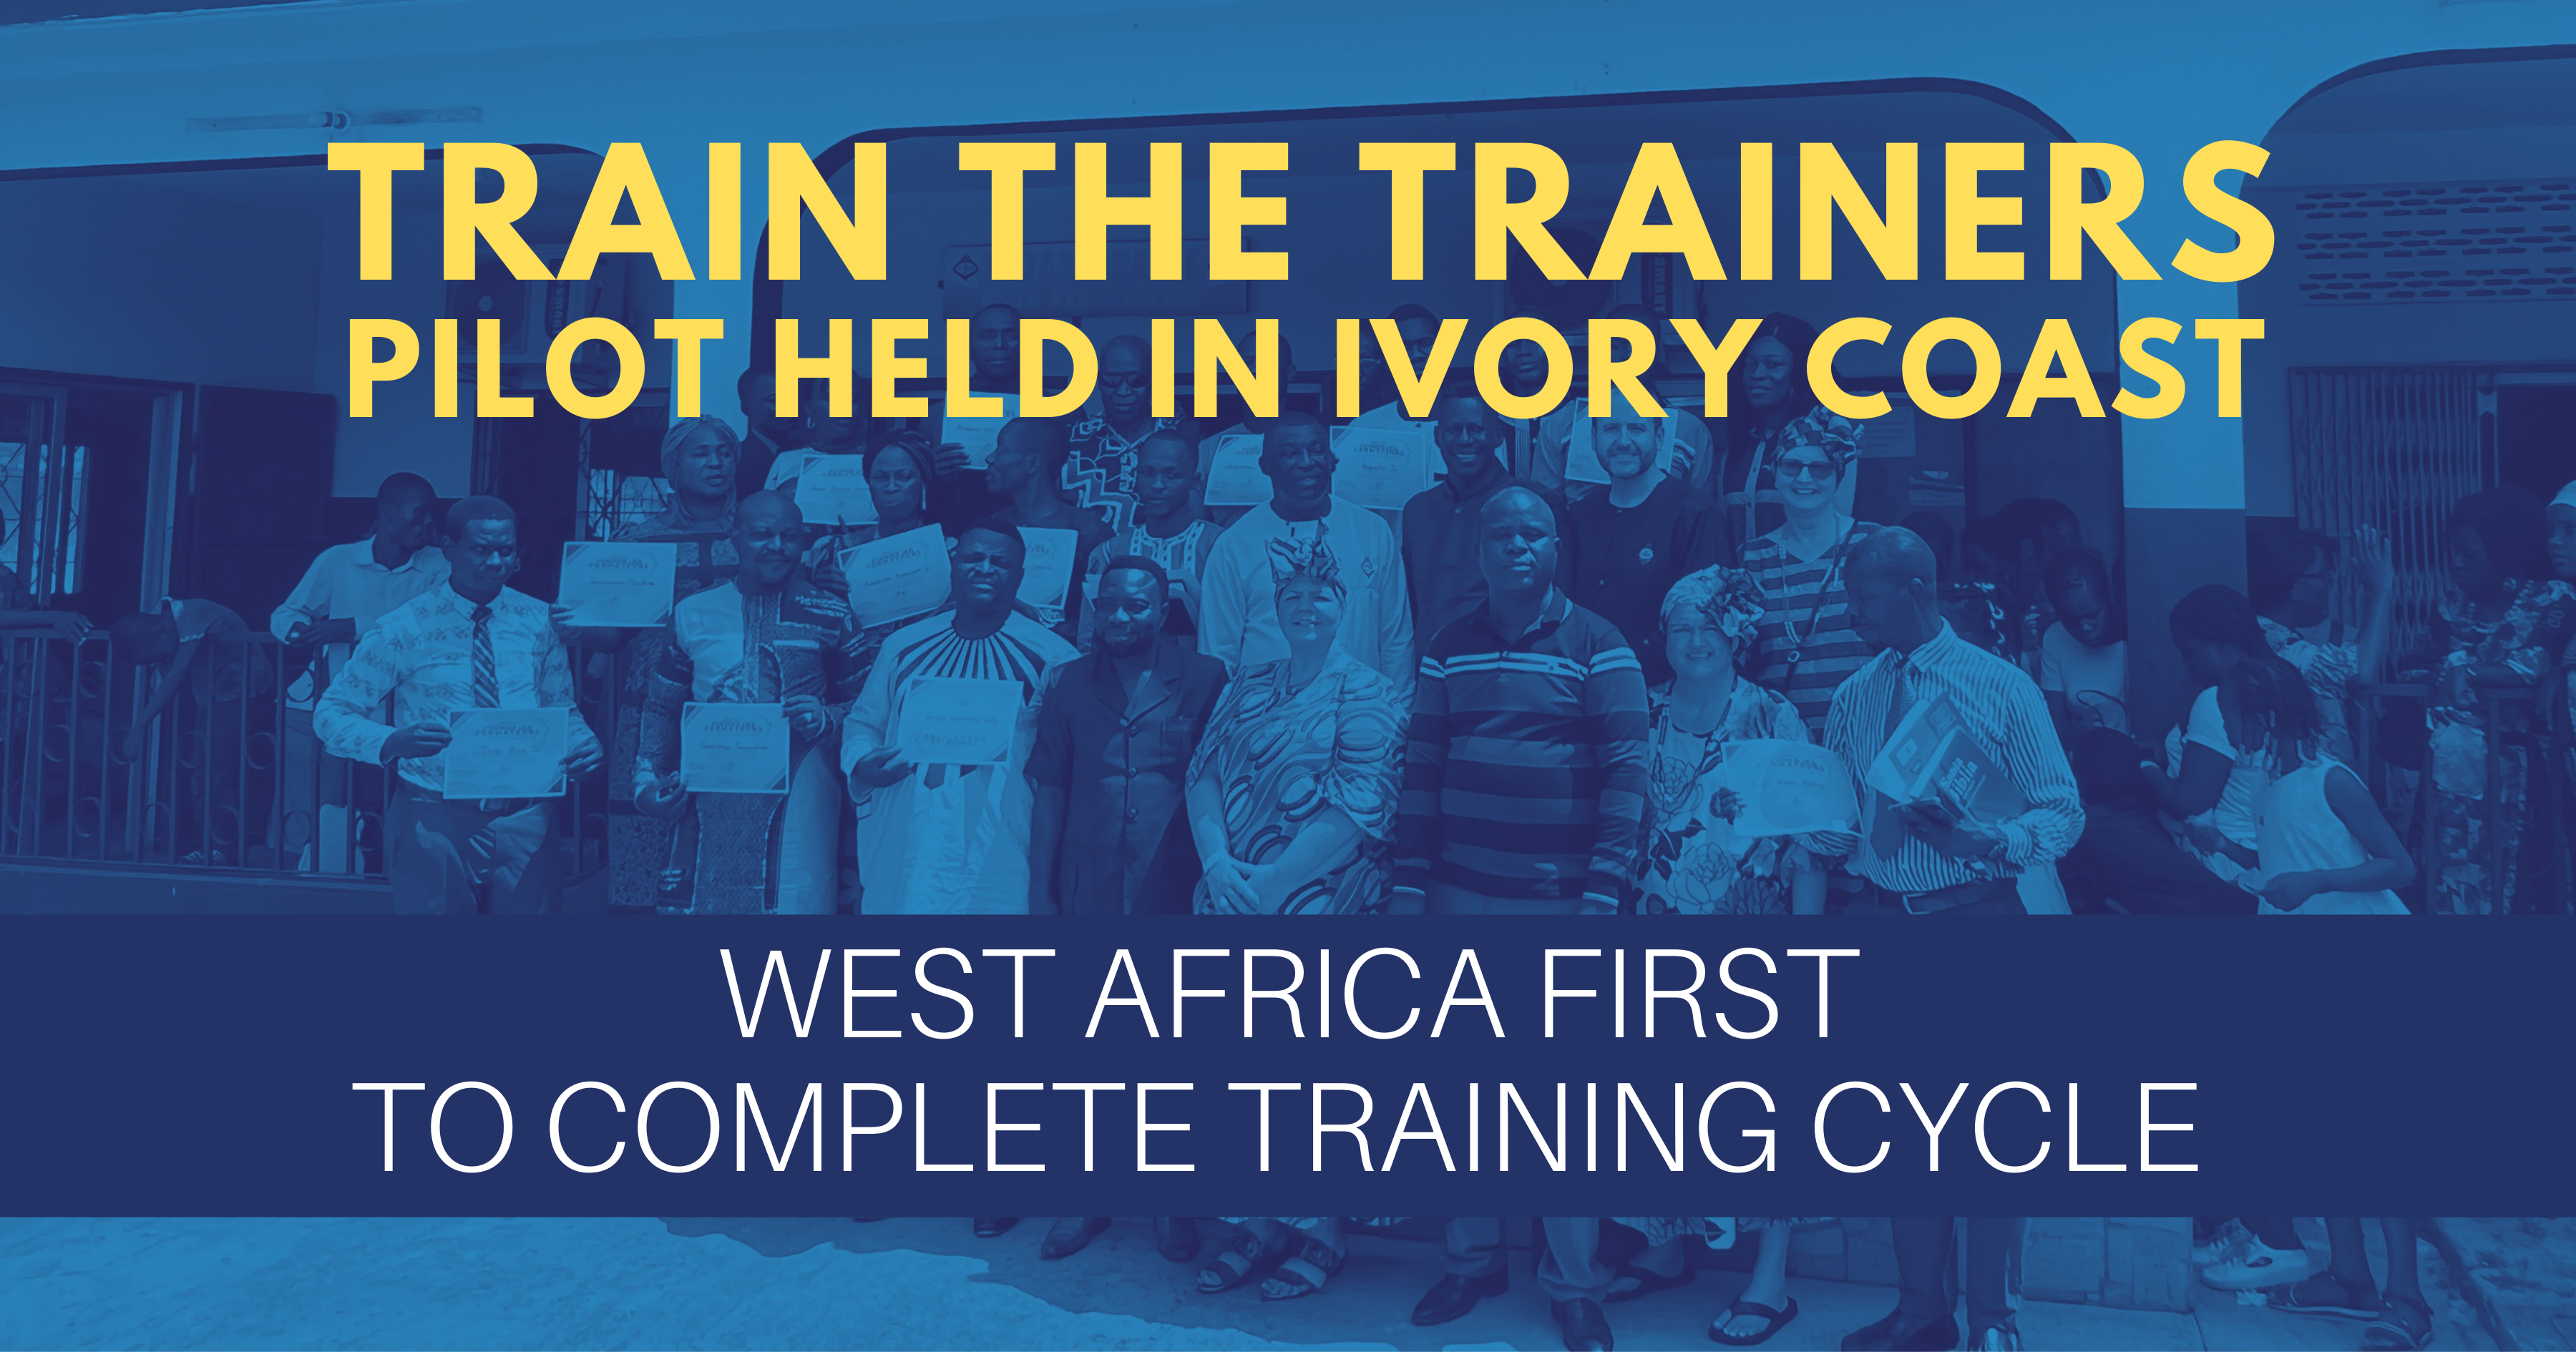 Train The Trainers Pilot Held In Ivory Coast